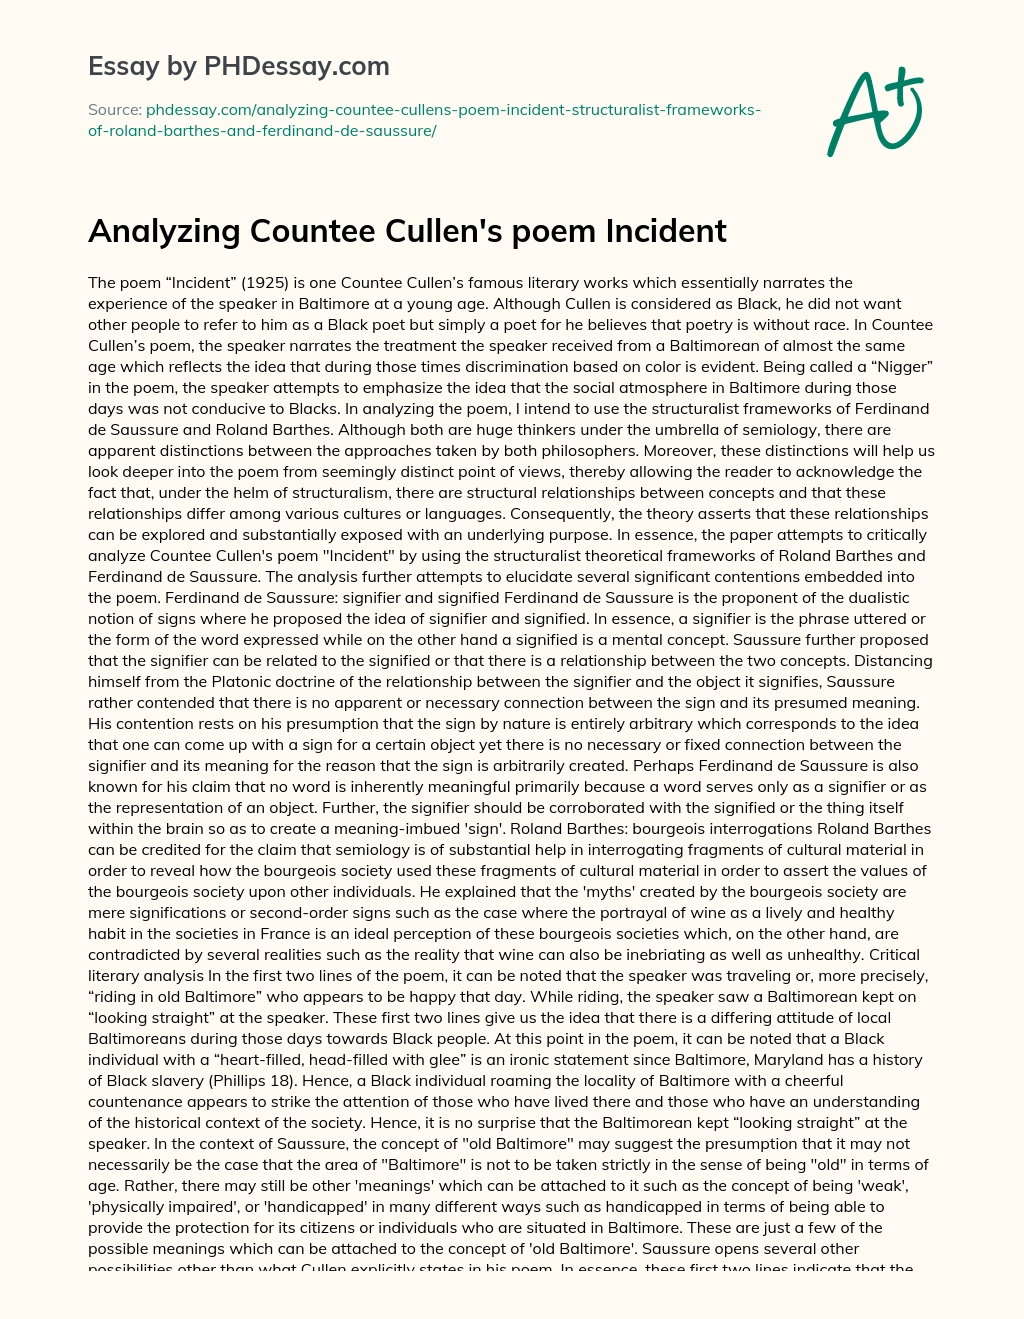 Analyzing Countee Cullen’s poem Incident essay